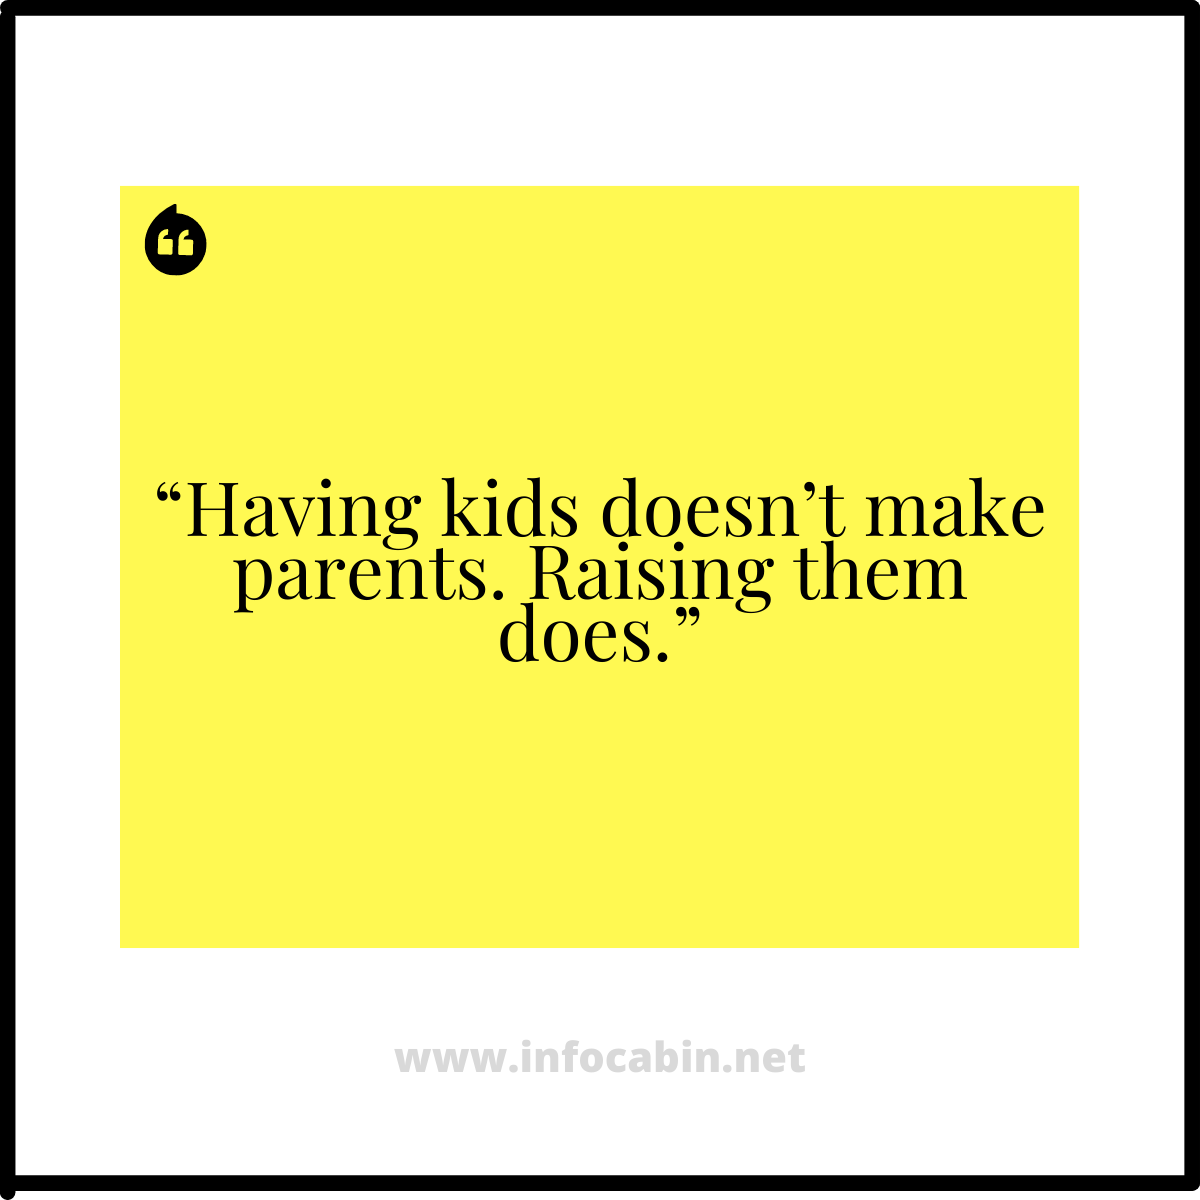 “Having kids doesn’t make parents. Raising them does.” Quotes for Selfish Parents